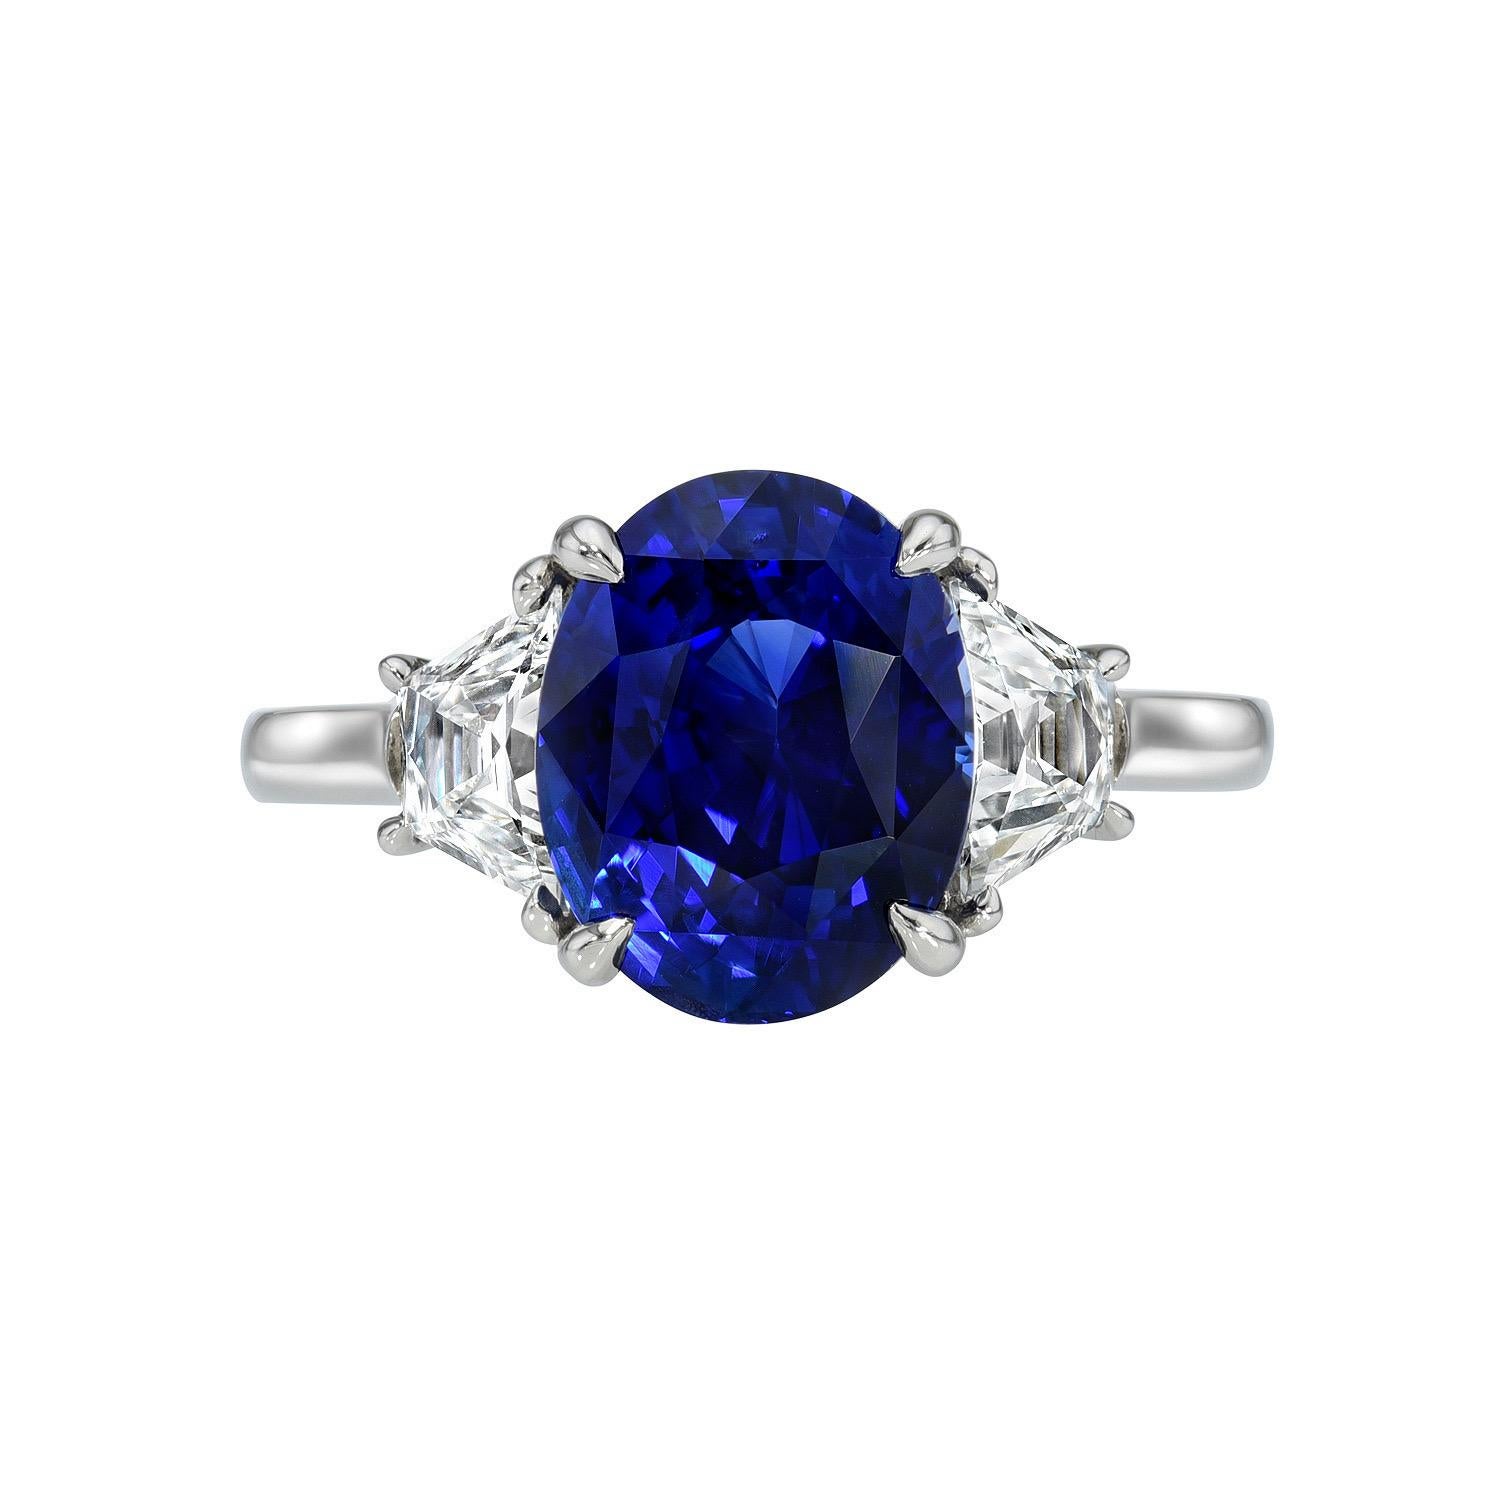 Women's Blue Sapphire Ring 5.08 Carat Oval For Sale